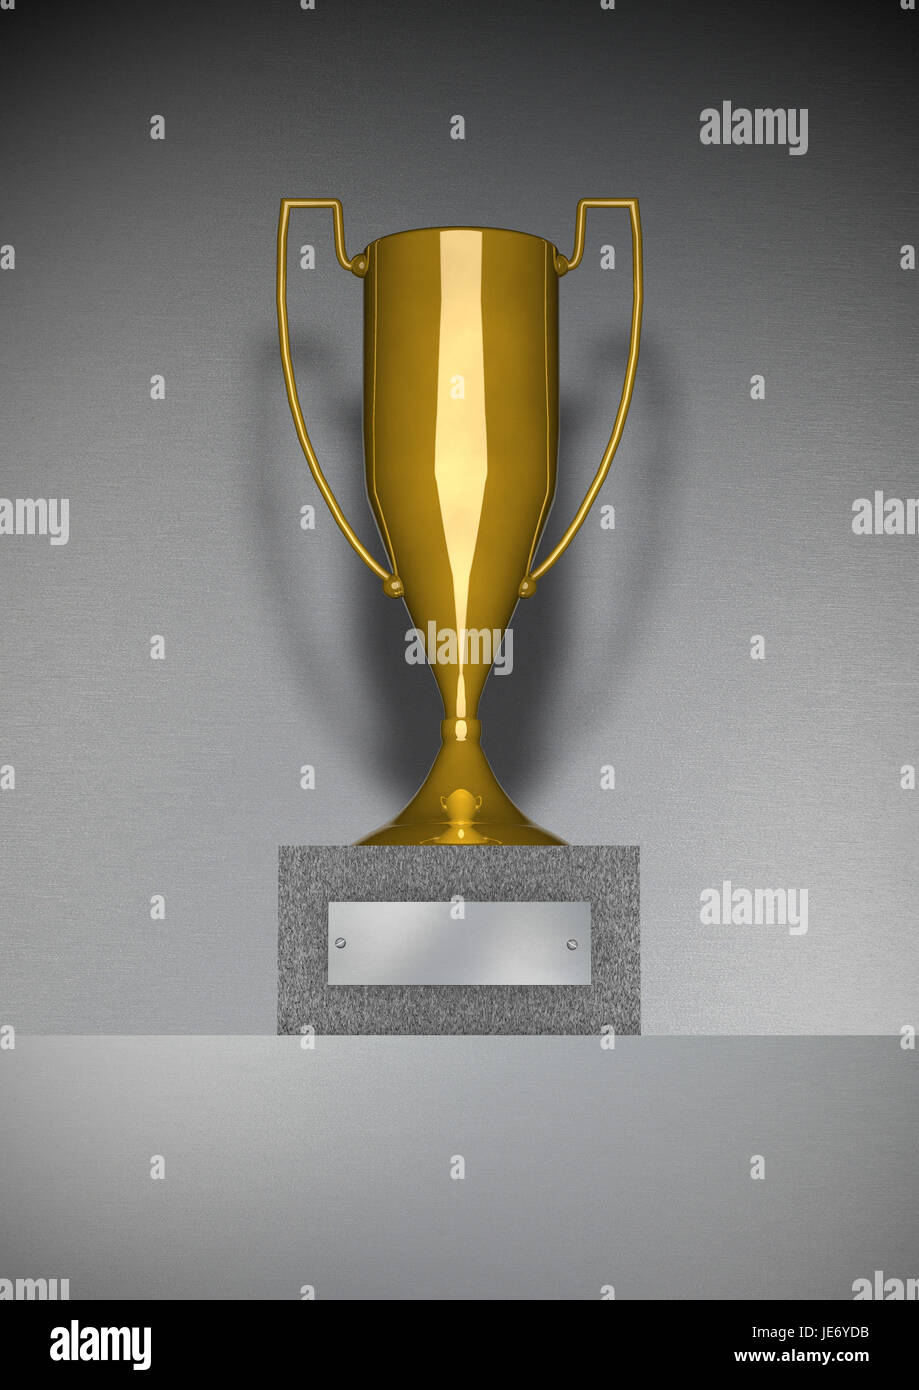 Cup, trophy, Stock Photo